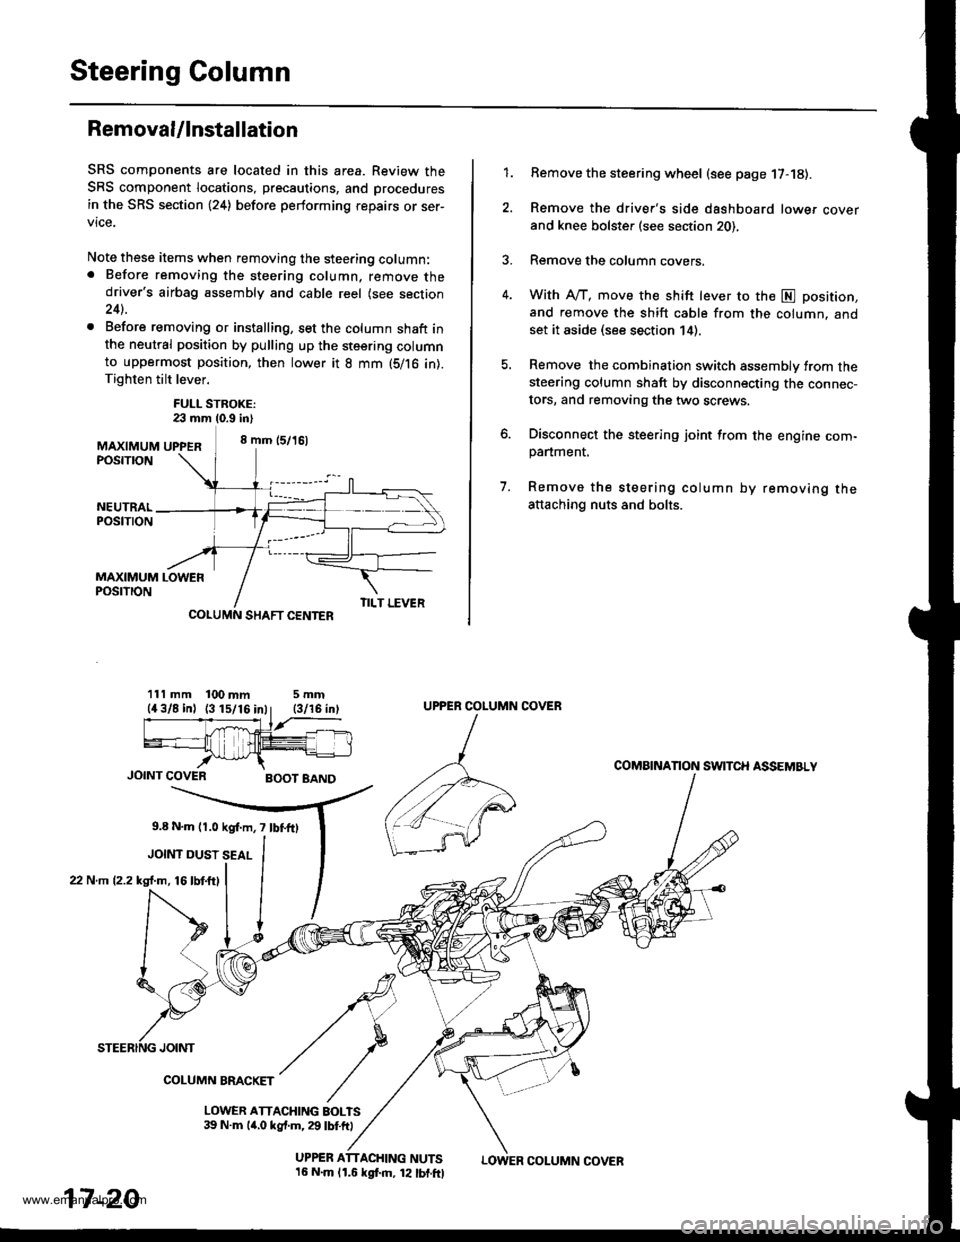 HONDA CR-V 1998 RD1-RD3 / 1.G User Guide 
Steering Column
Removal/lnstallation
SRS components are located in this area. Review the
SRS component locations, precautions, and procedures
in the SRS section (24) before performing repairs or ser-